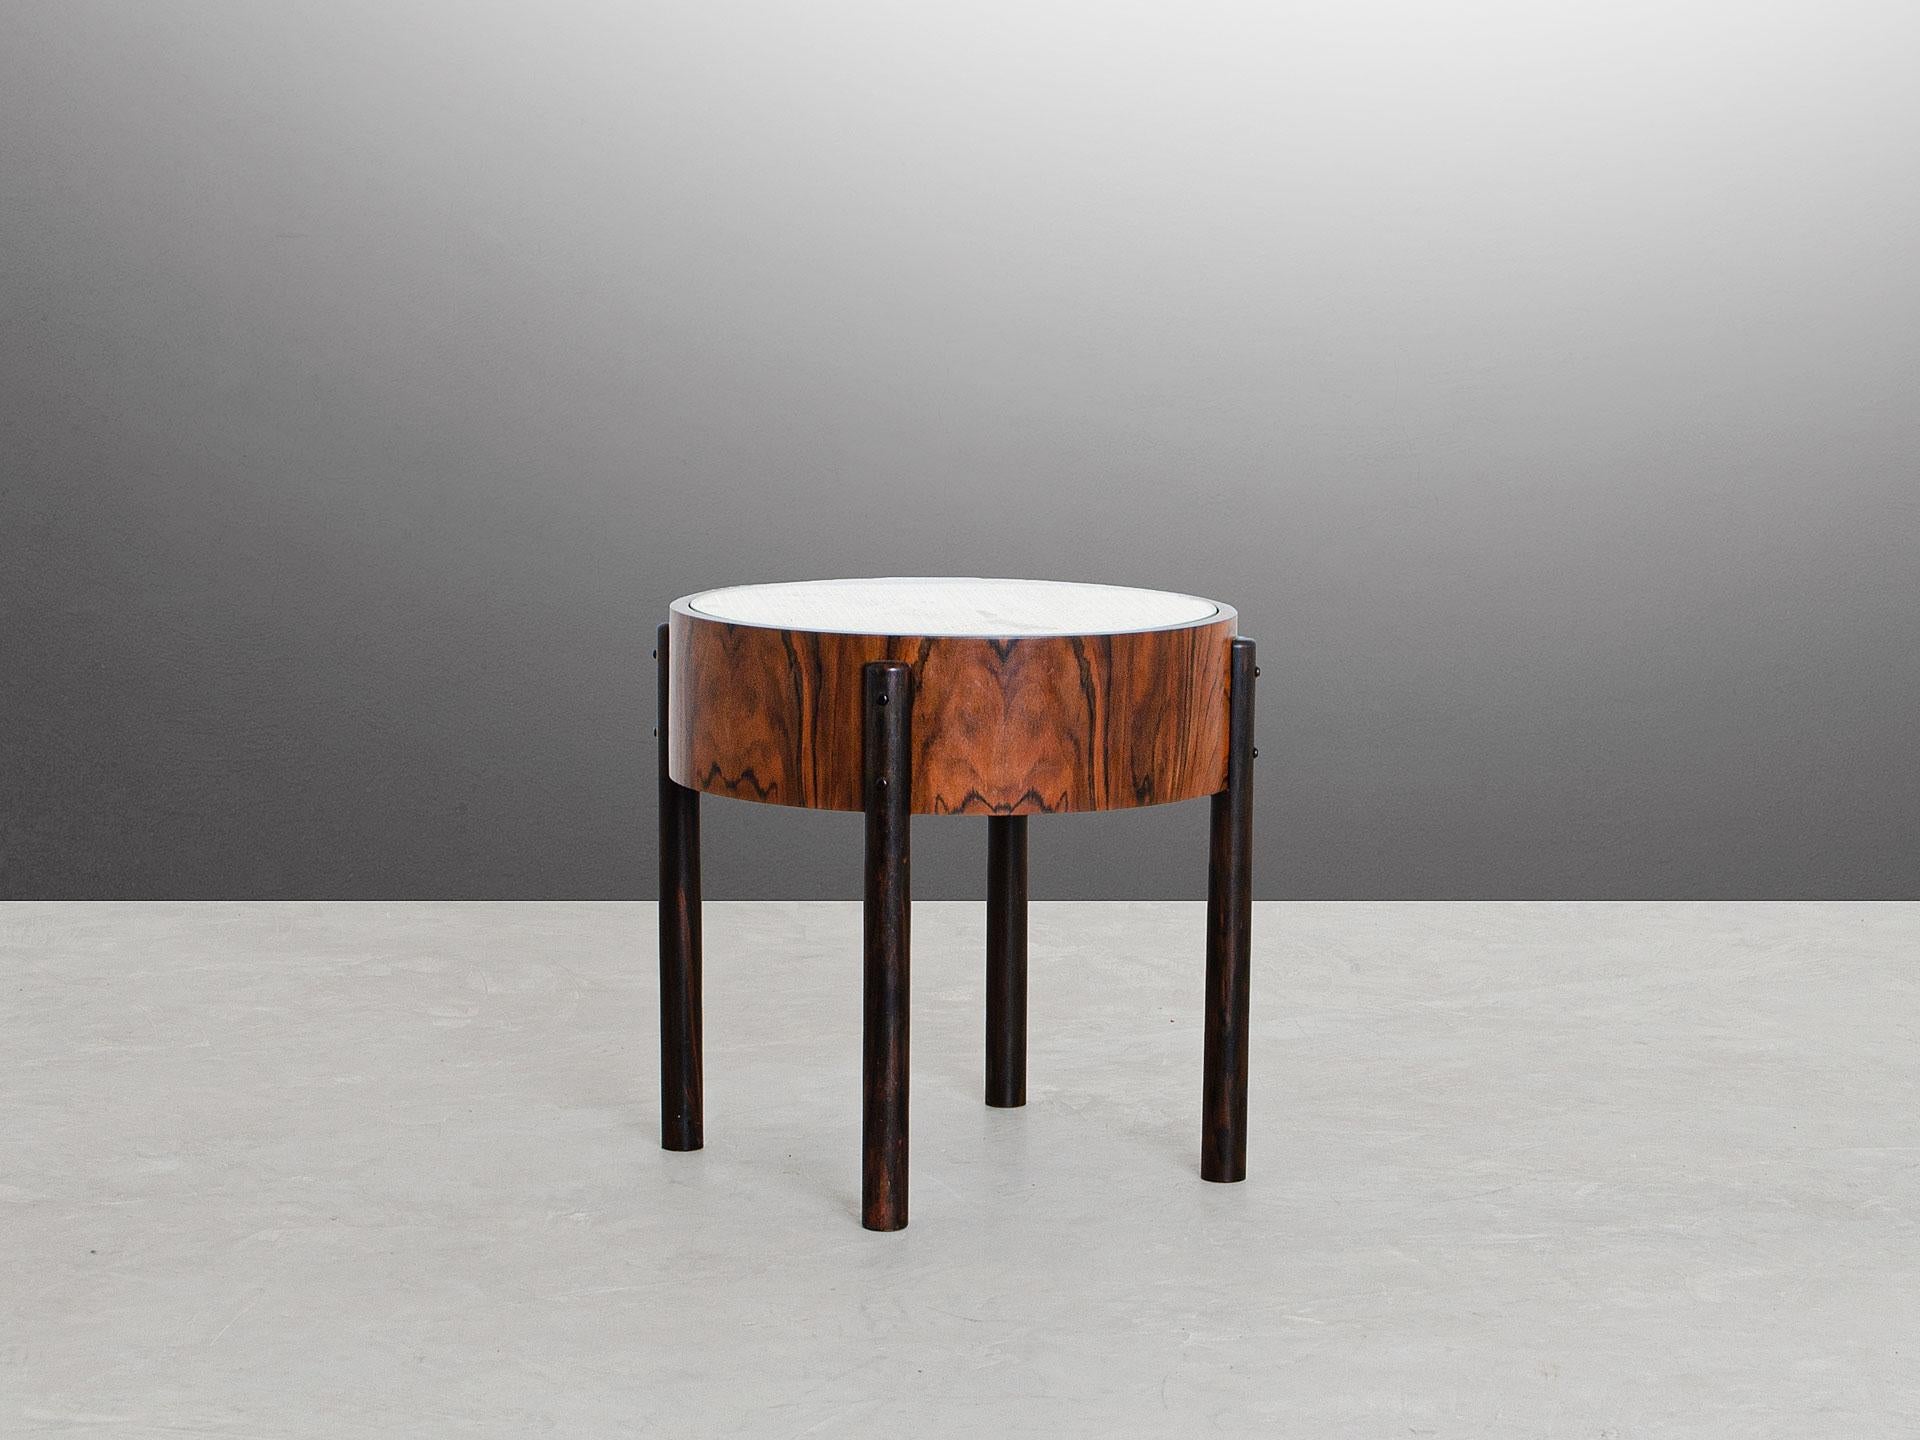 The round Adi table is a 60's-inspired side table and it was started to be produced in 2019. 
The simple lines from the minimalistic design combined with the roughness of the materials together bring a very special quality to the piece, that